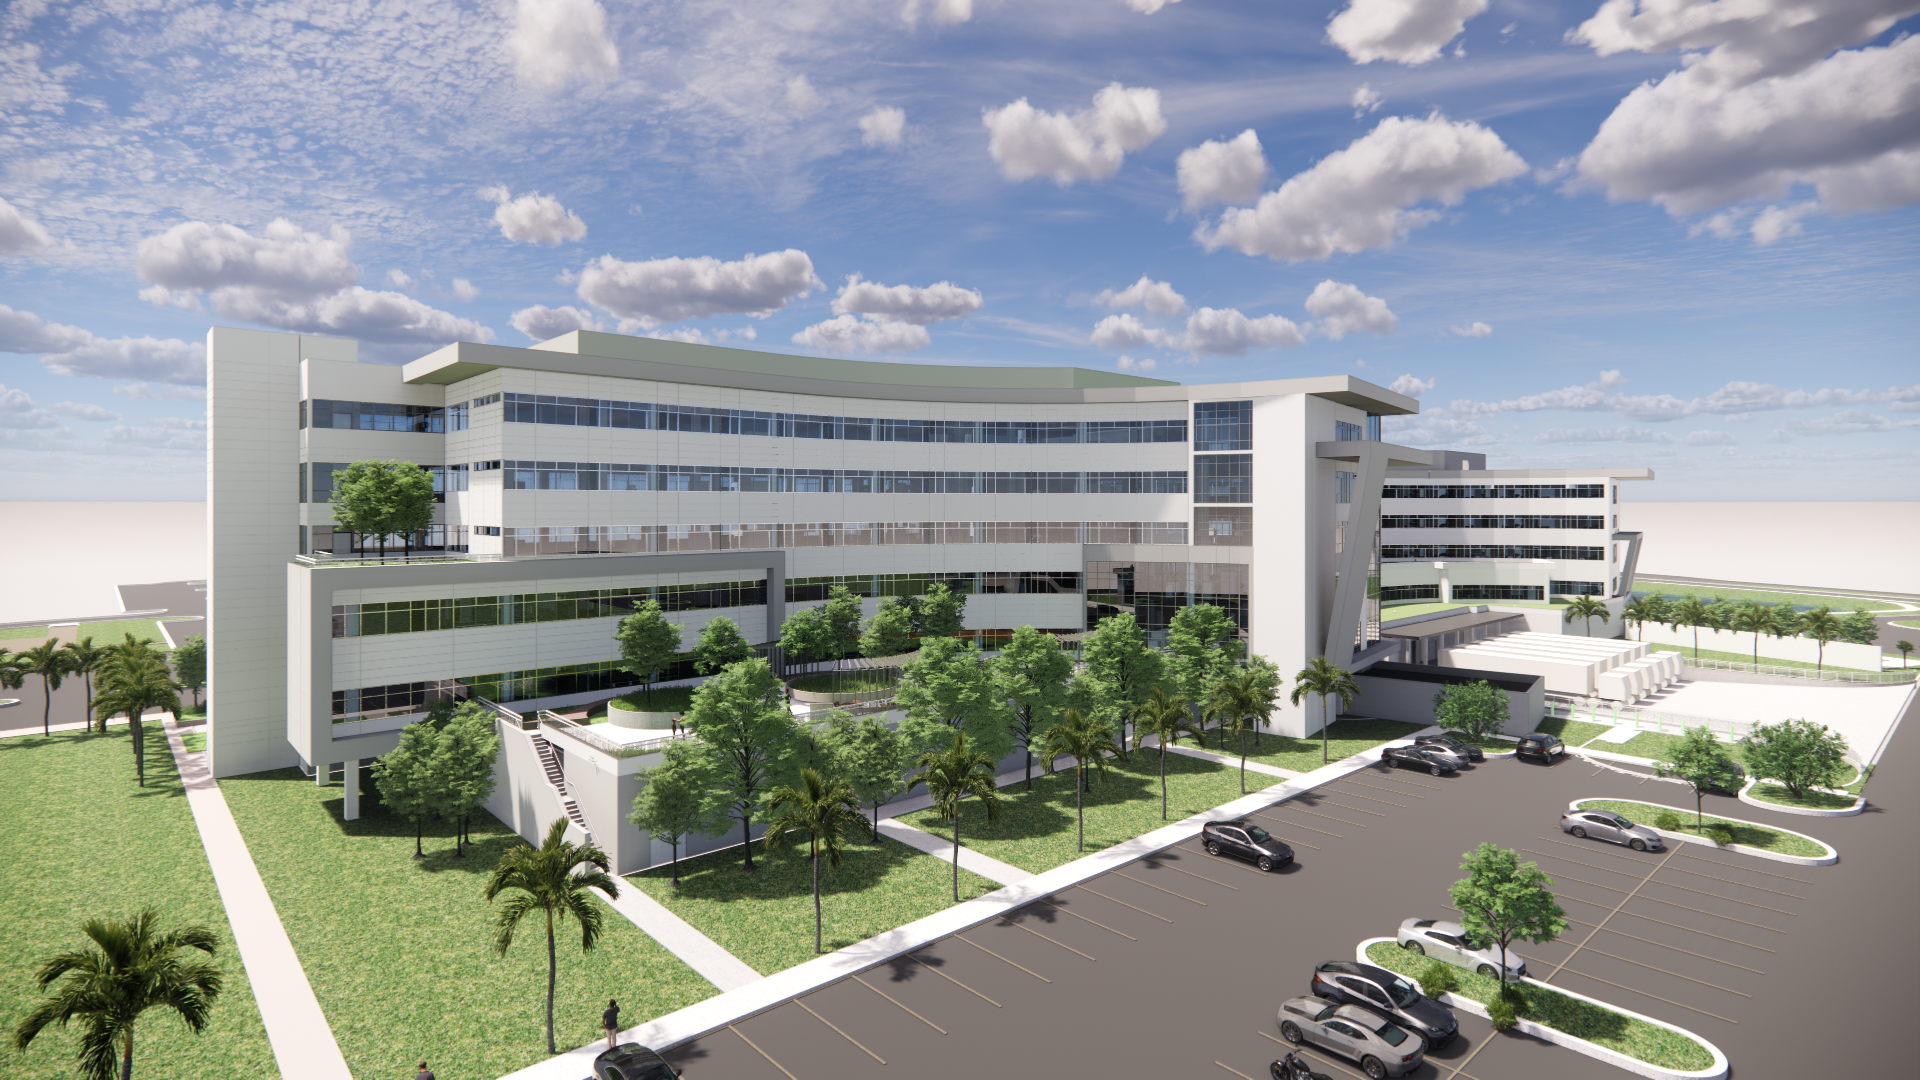 An artist's rendering of the new UF Health North tower.